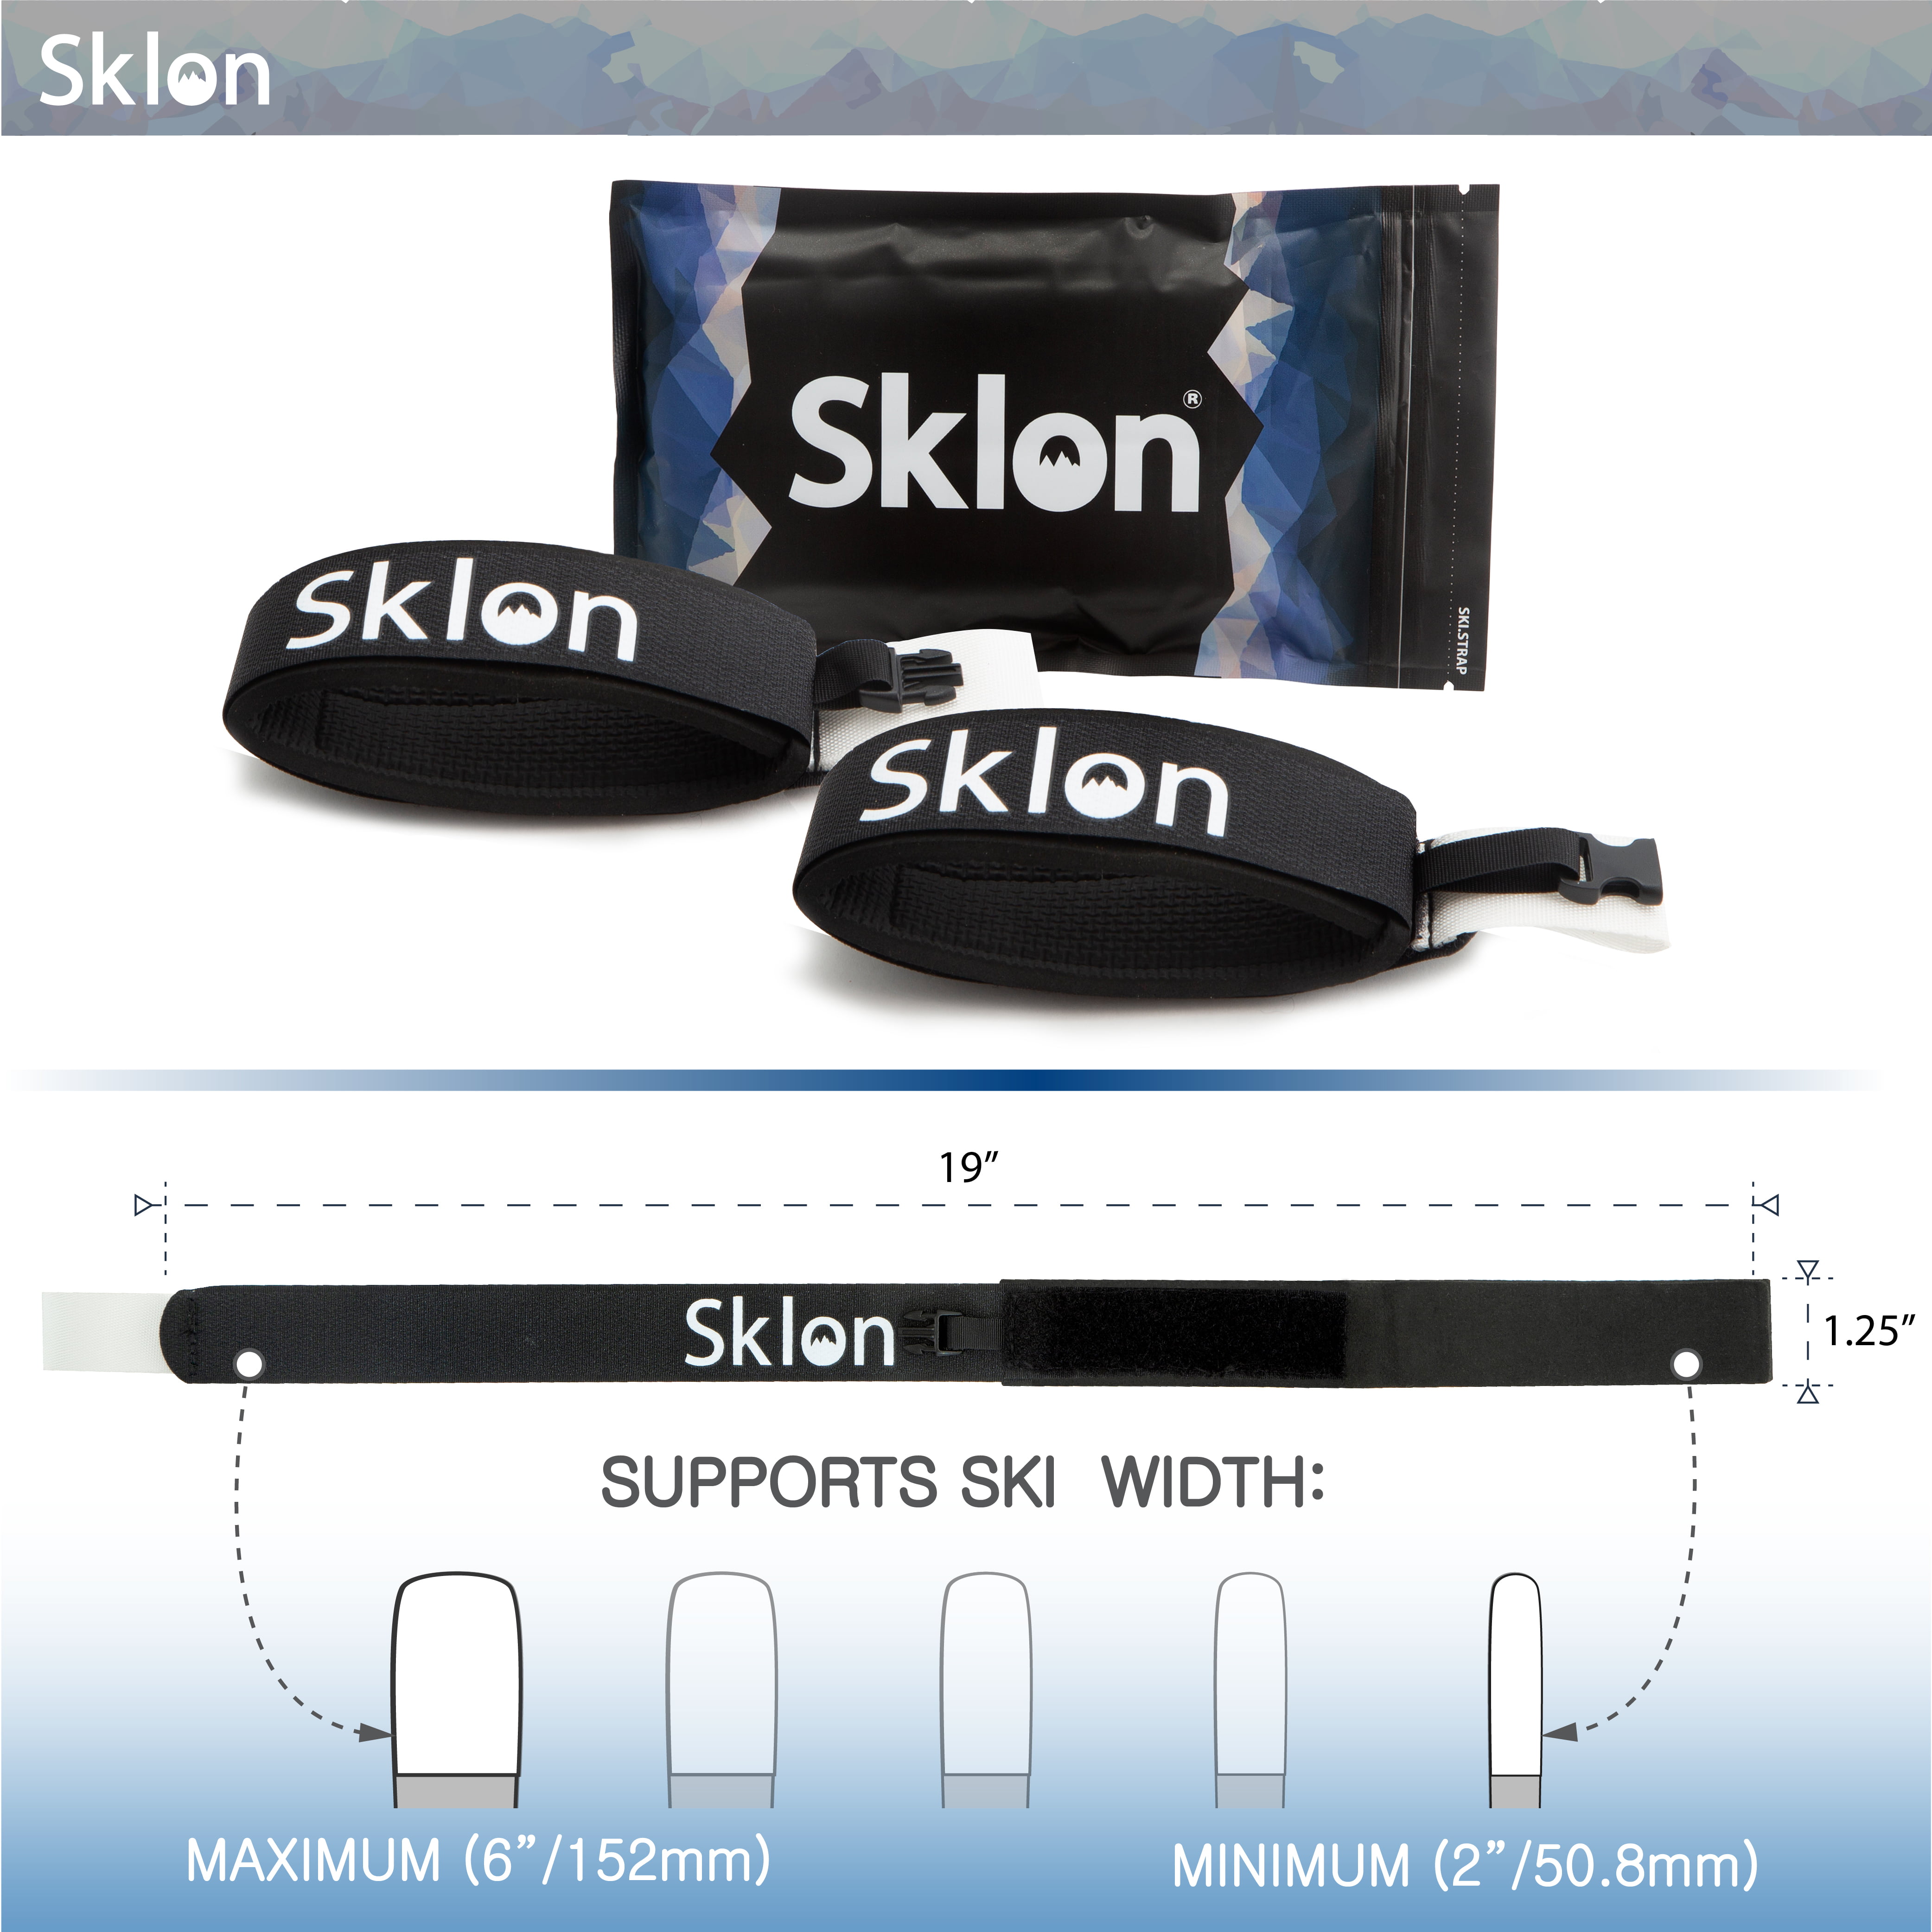 Sklon Ski Strap Fasteners - Rubber 2 Pack Carrier - Securely Transport Your  Skis - Ski Accessories Great for Carrying Ski Gear - Men, Women and Kids